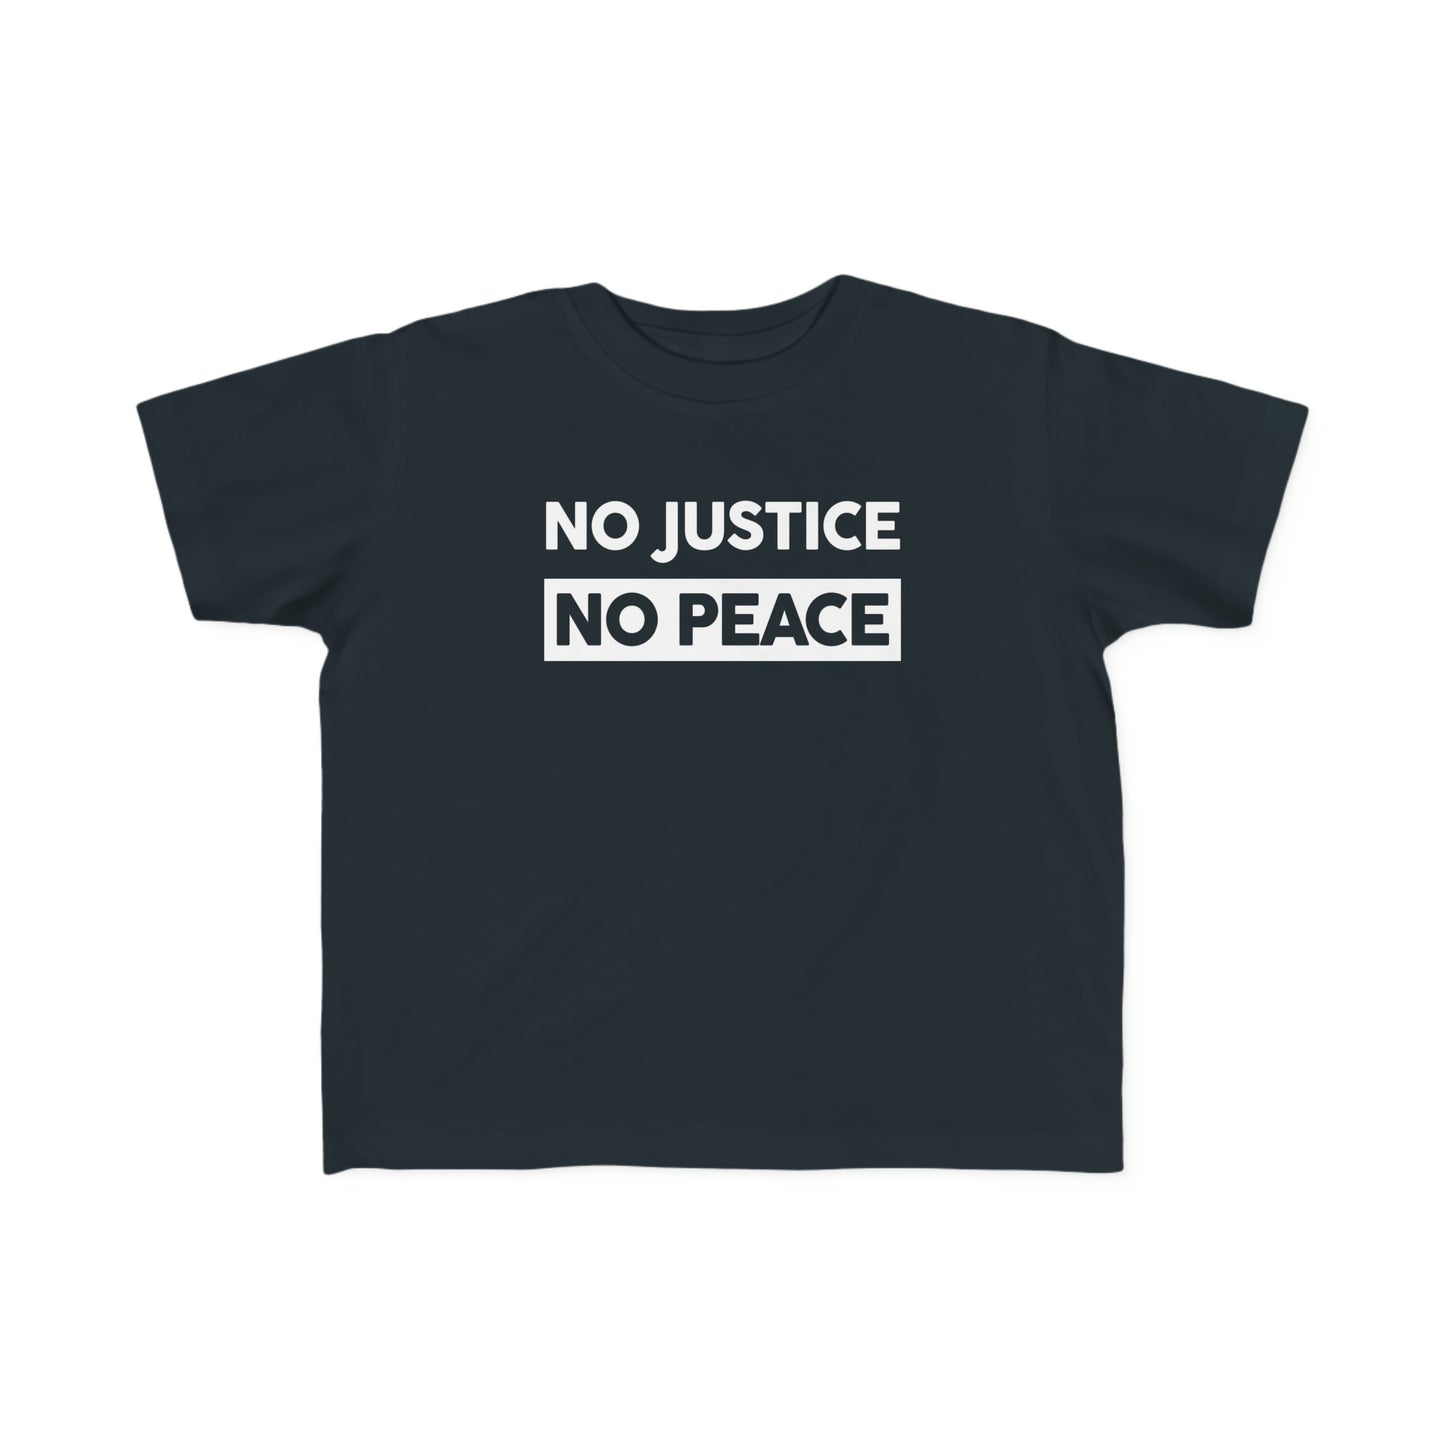 “No Justice, No Peace” Toddler's Tee